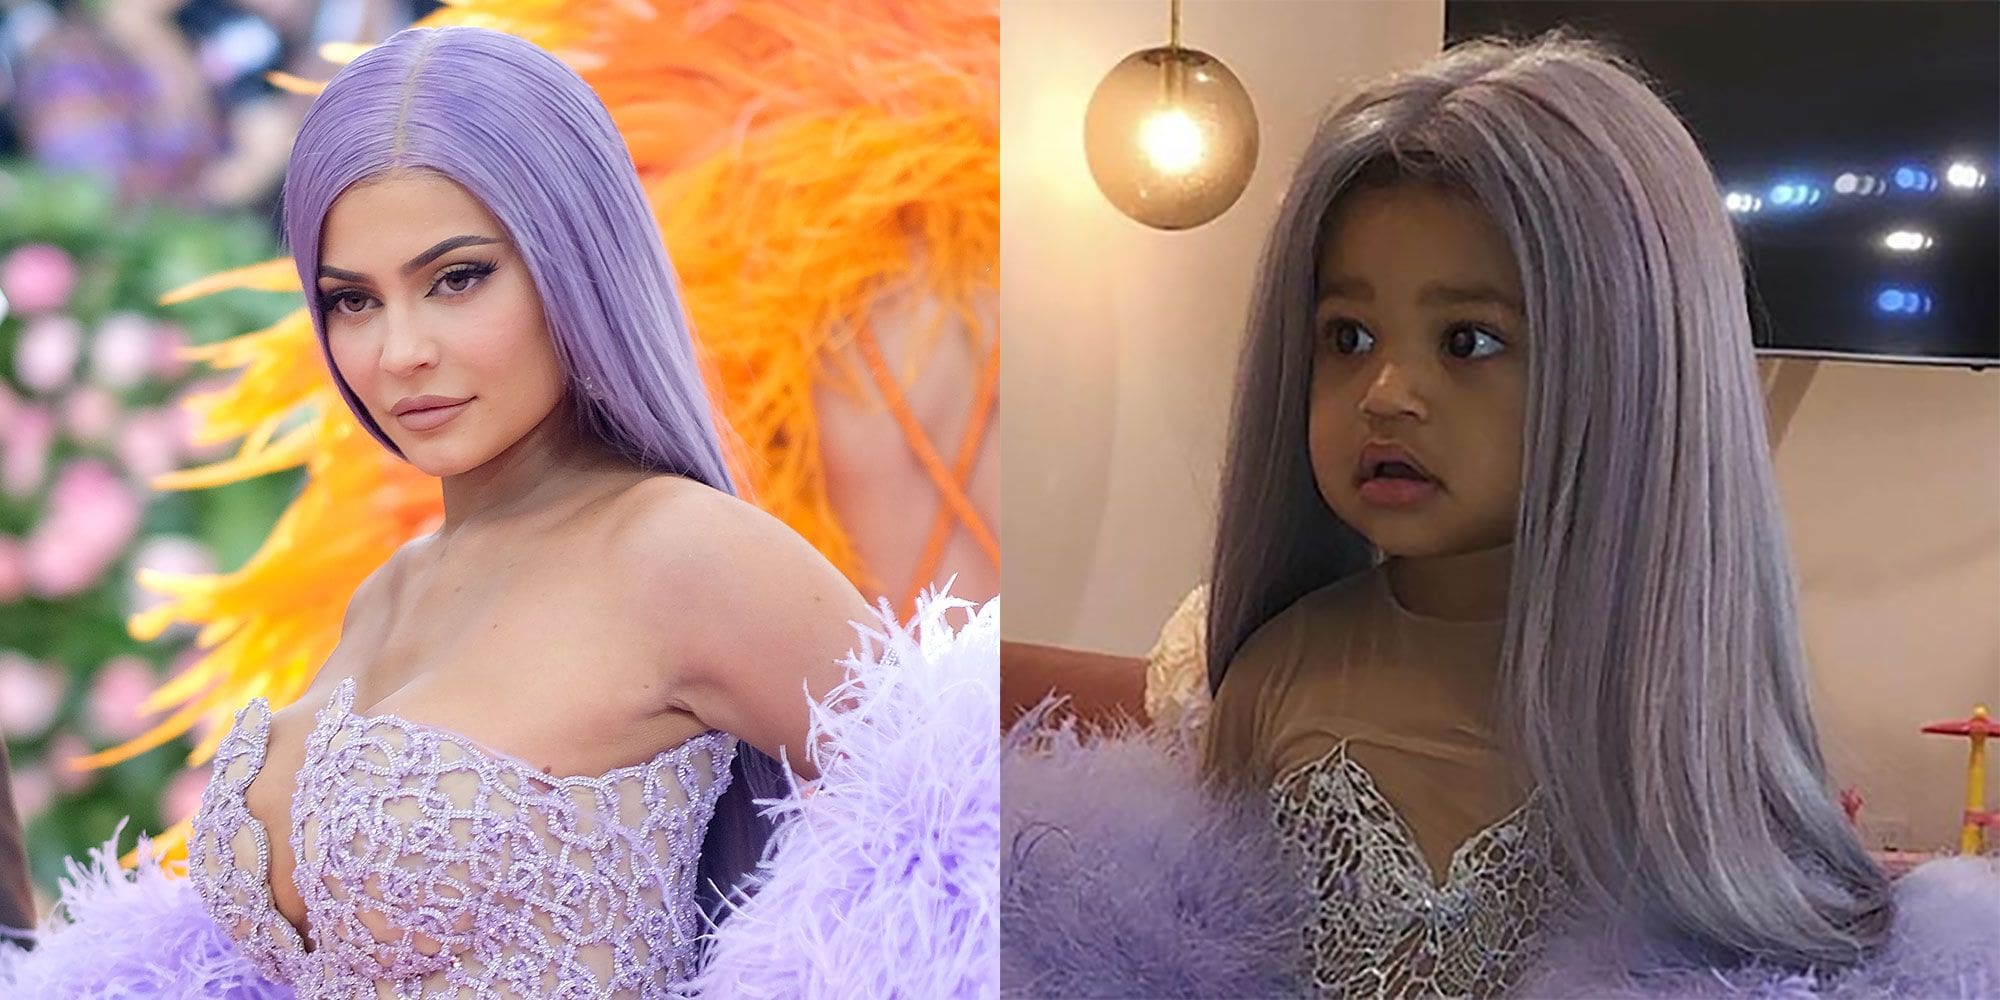 Kylie Jenner's Baby Girl Stormi Channels Her Mom's Met Gala Look - Check Out The Sweet Video